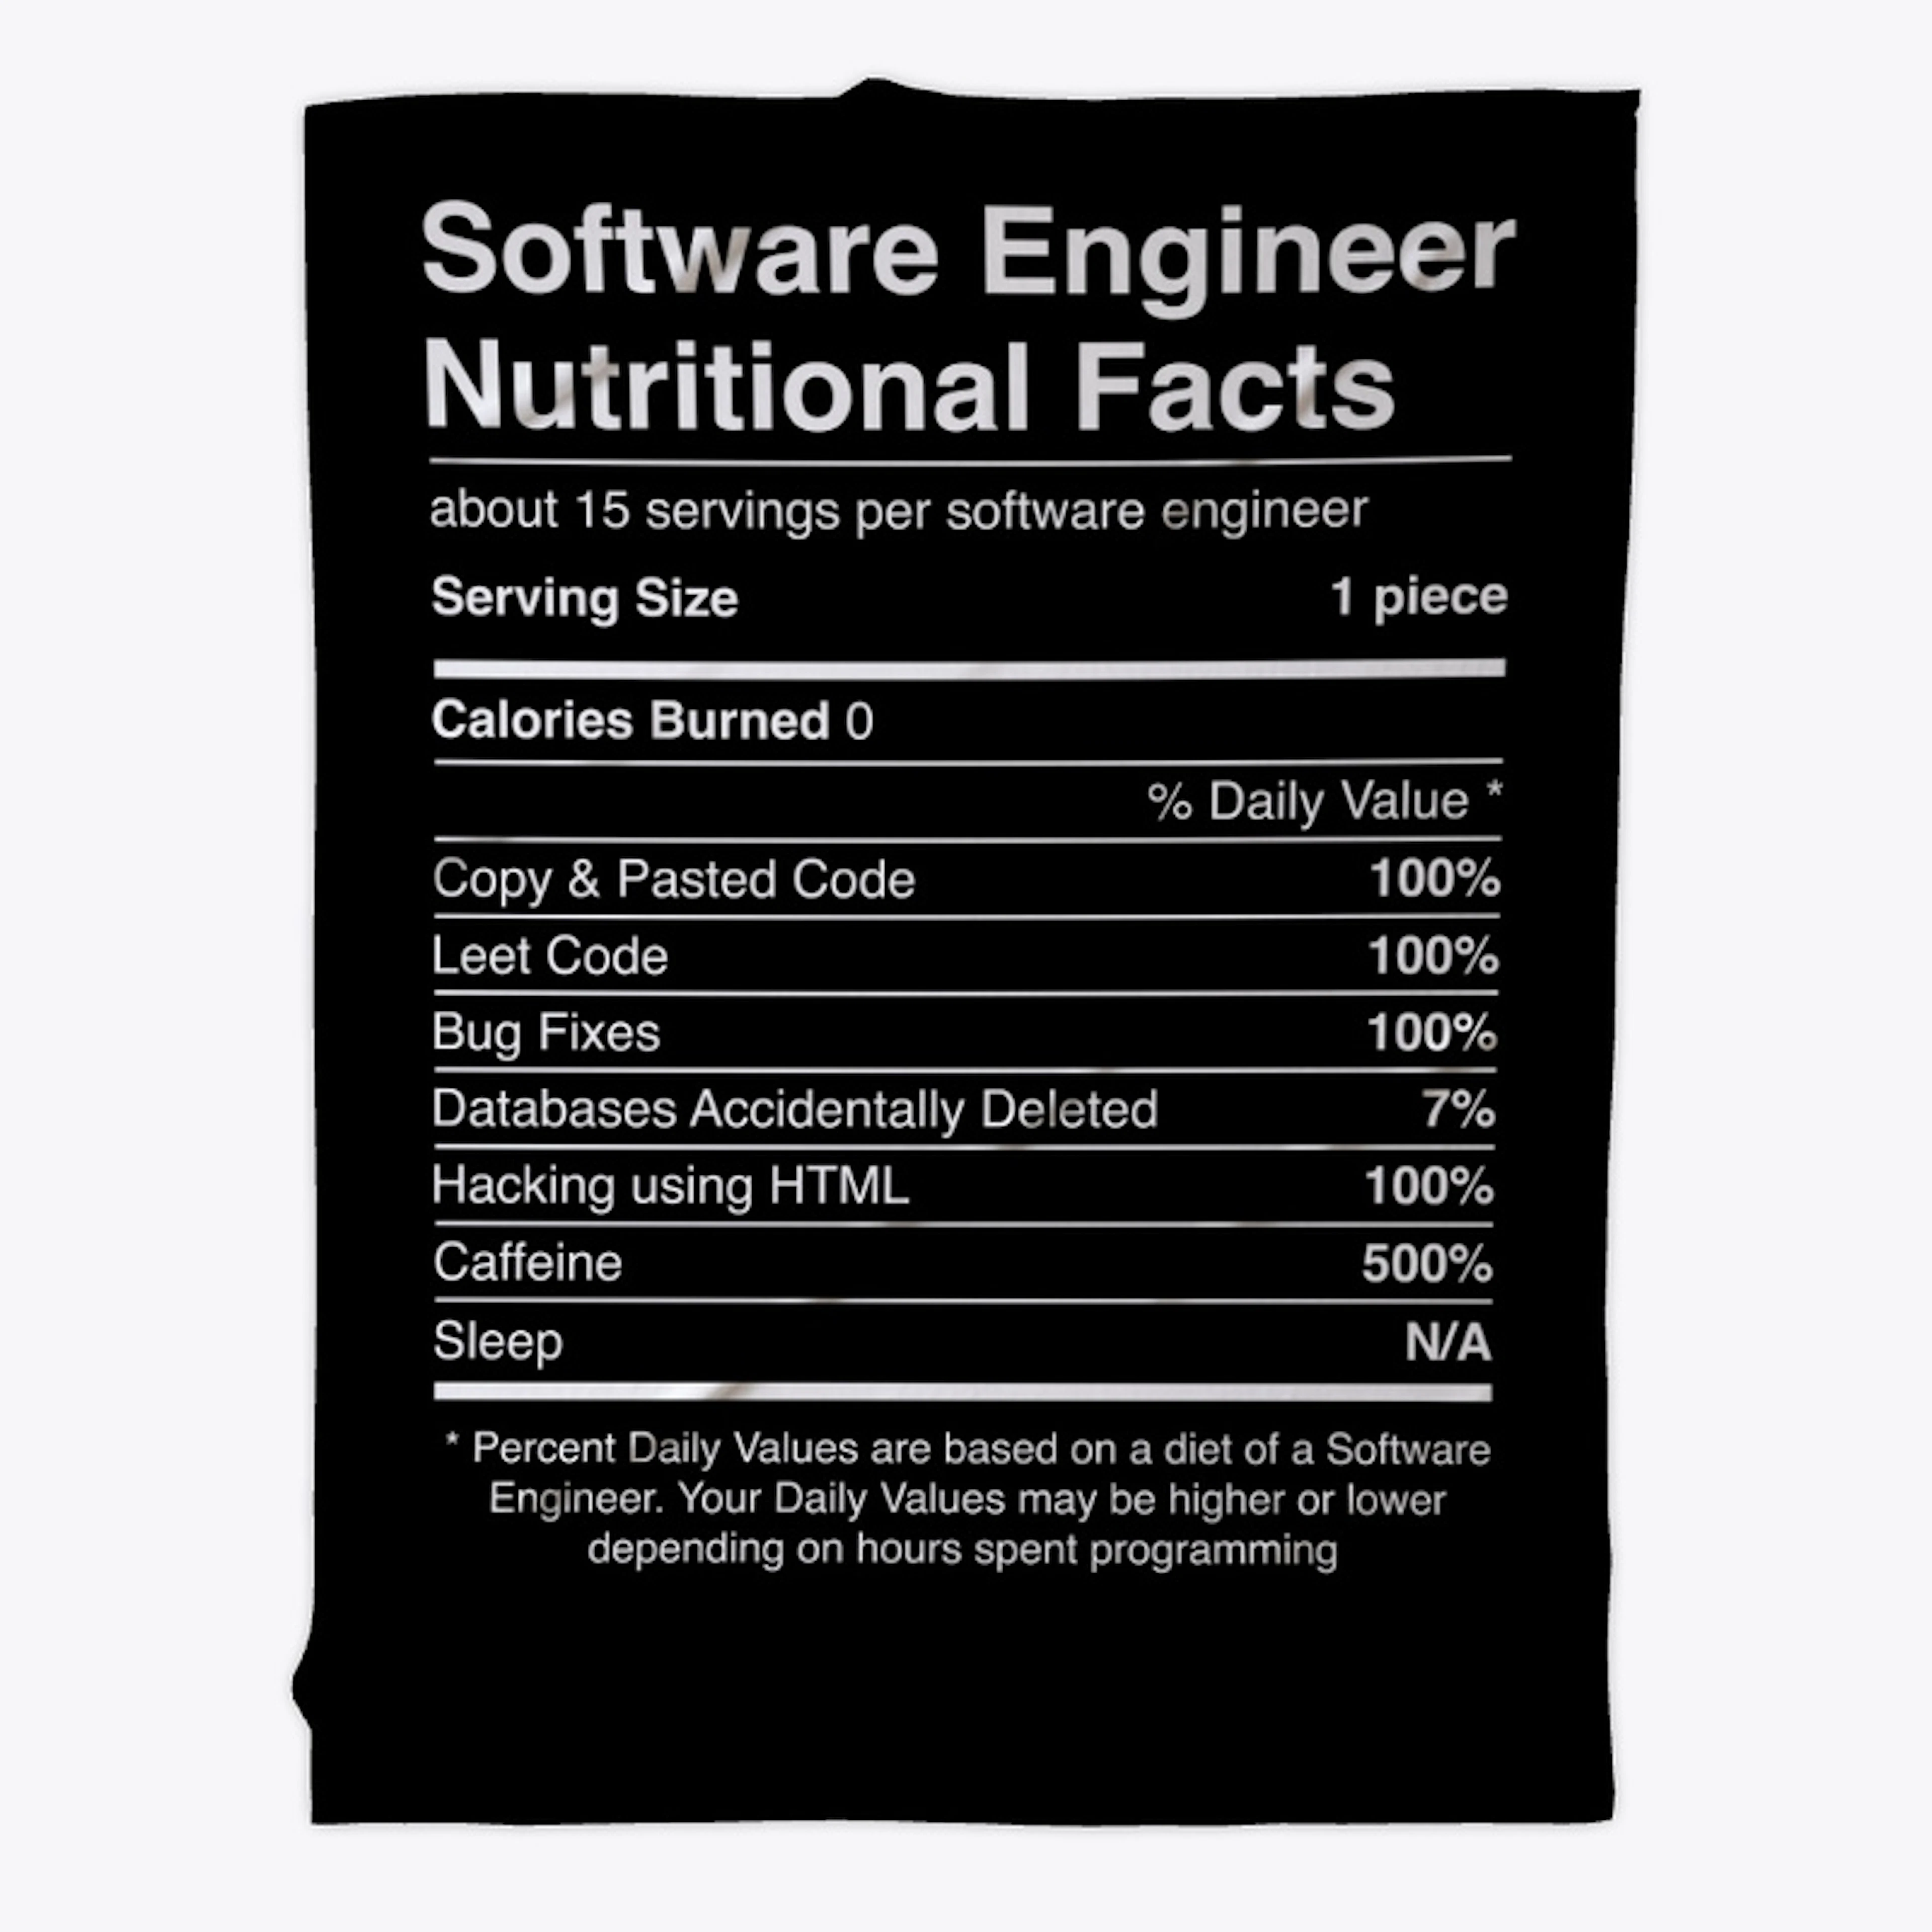 Software Engineer Nutritional Facts